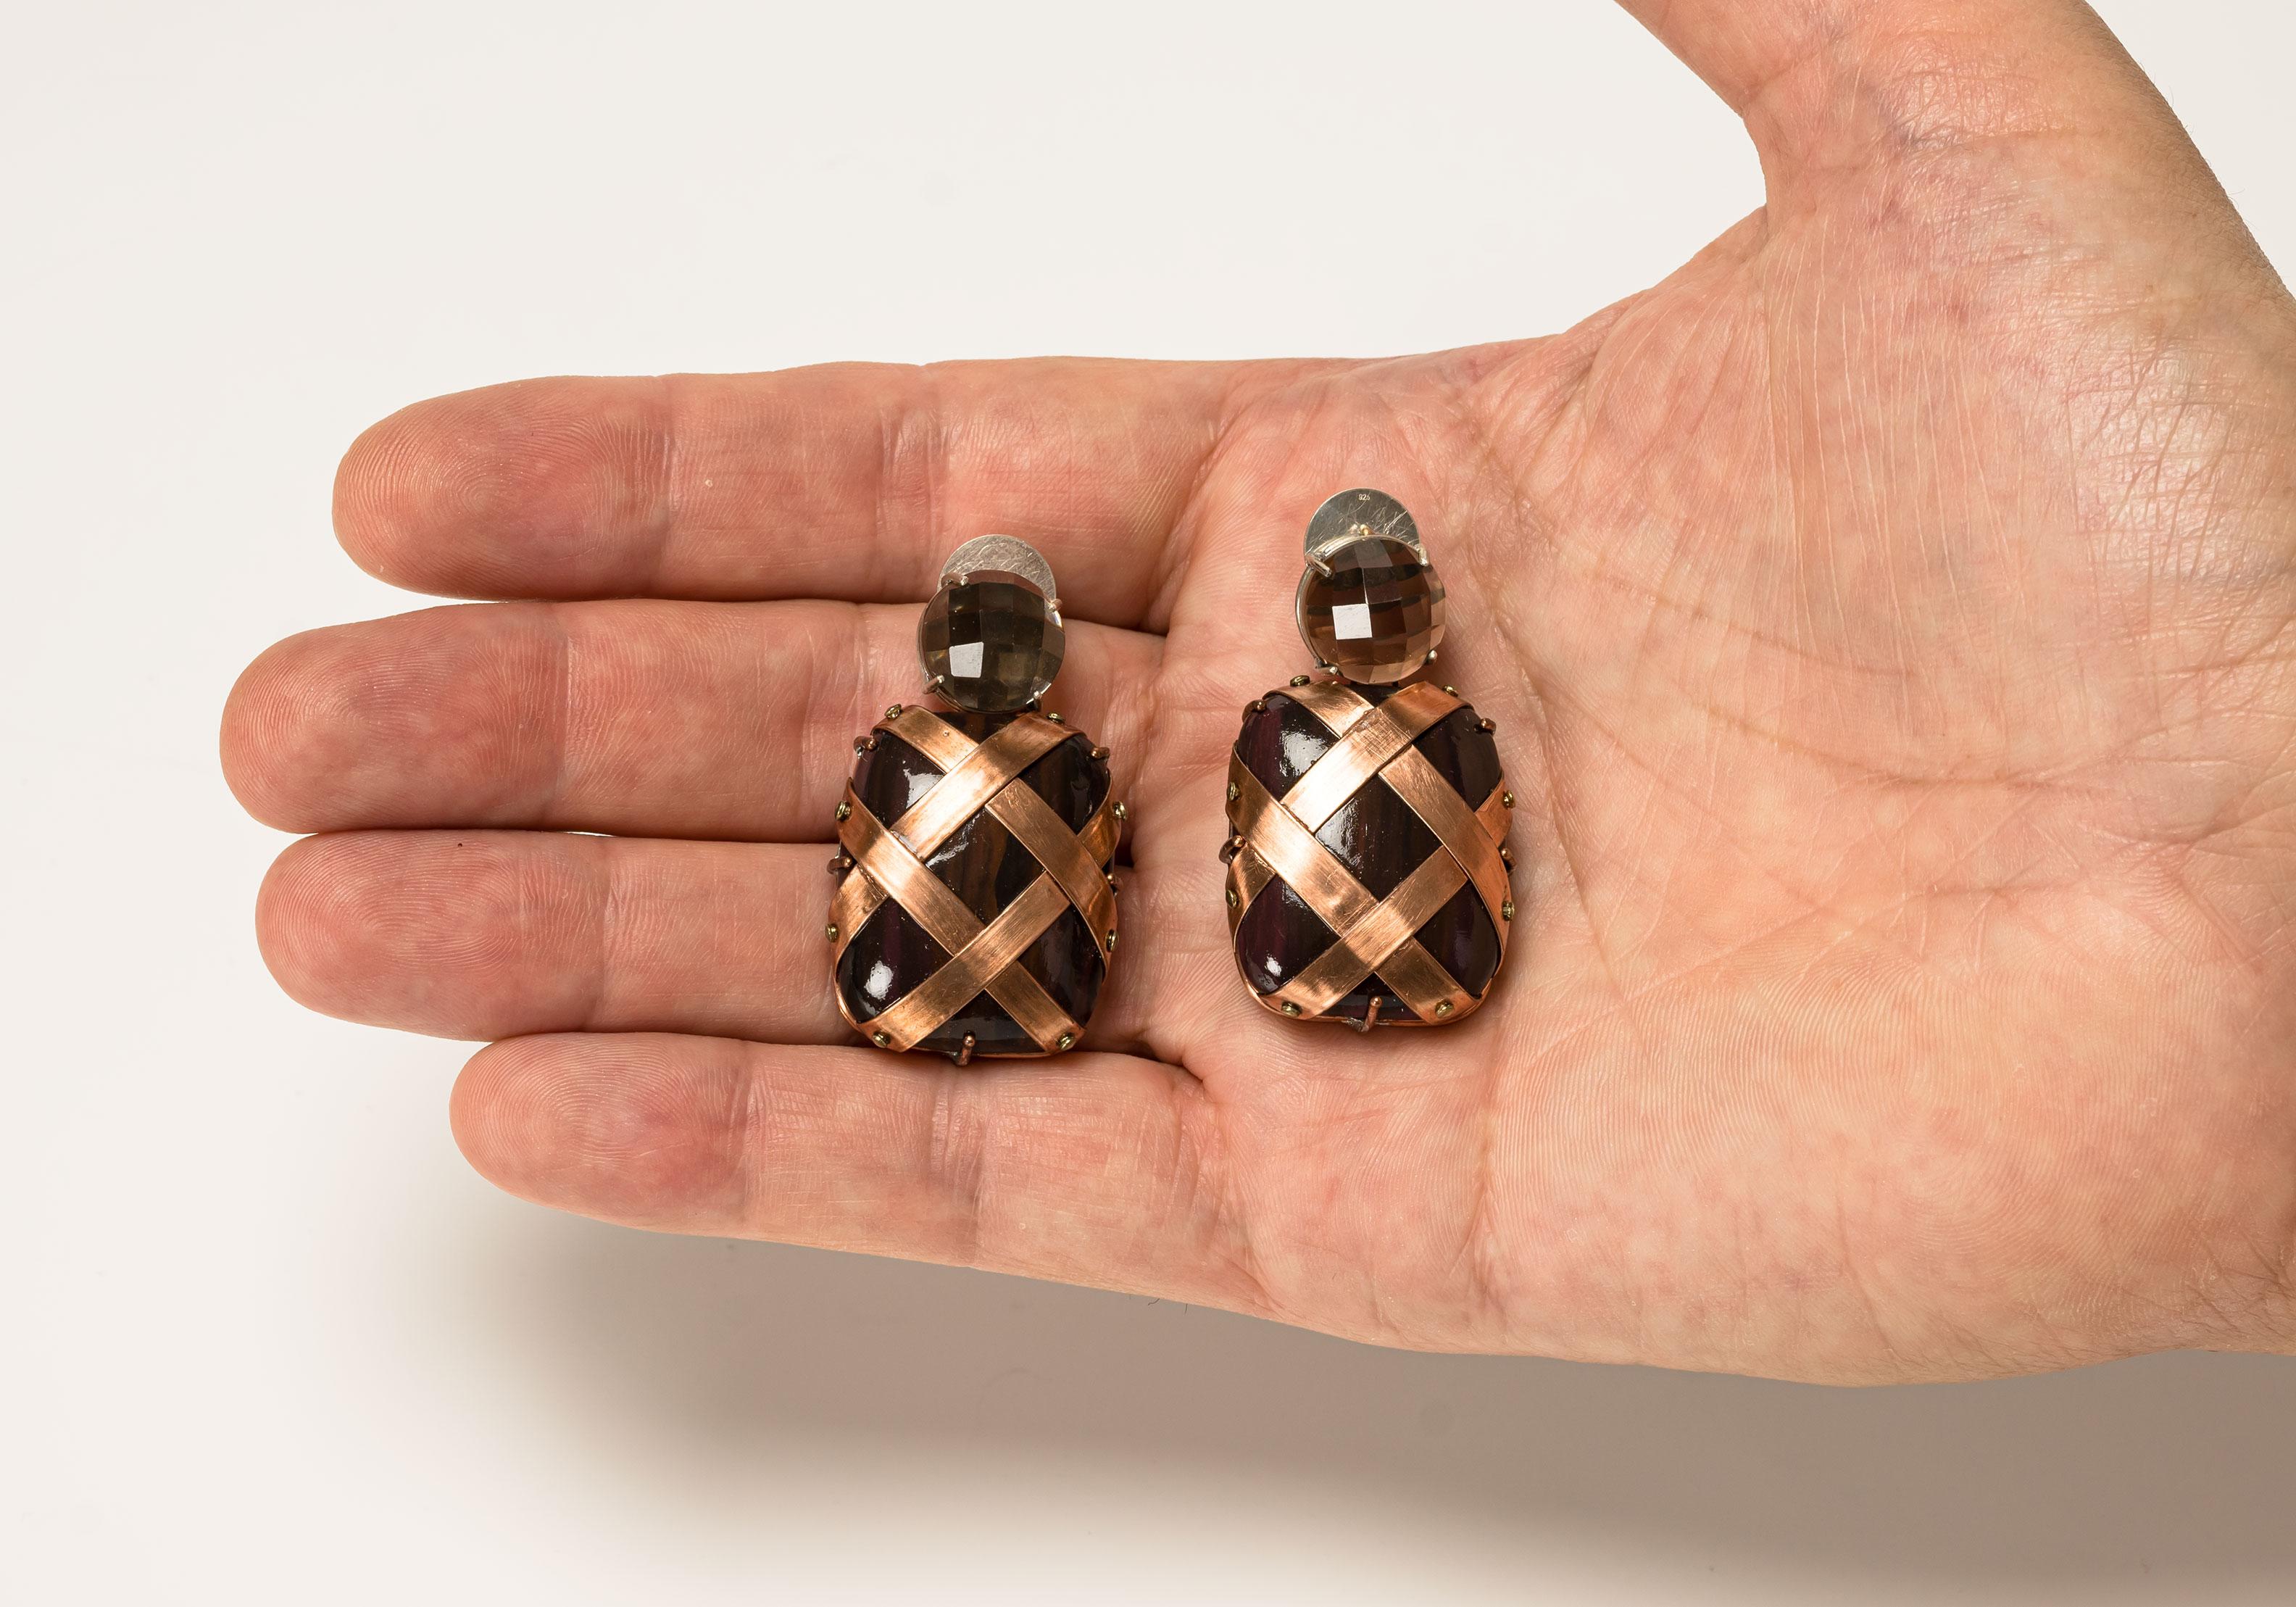 Earrings “Texto”, 2022, are a one-of-a-kind contemporary author jewelry by italian artist Gian Luca Bartellone.
Materials: papier-mâché, gold 18kt, silver, copper, smoky quartz.

The main body is made of papier-mâché and painted by hand with brown